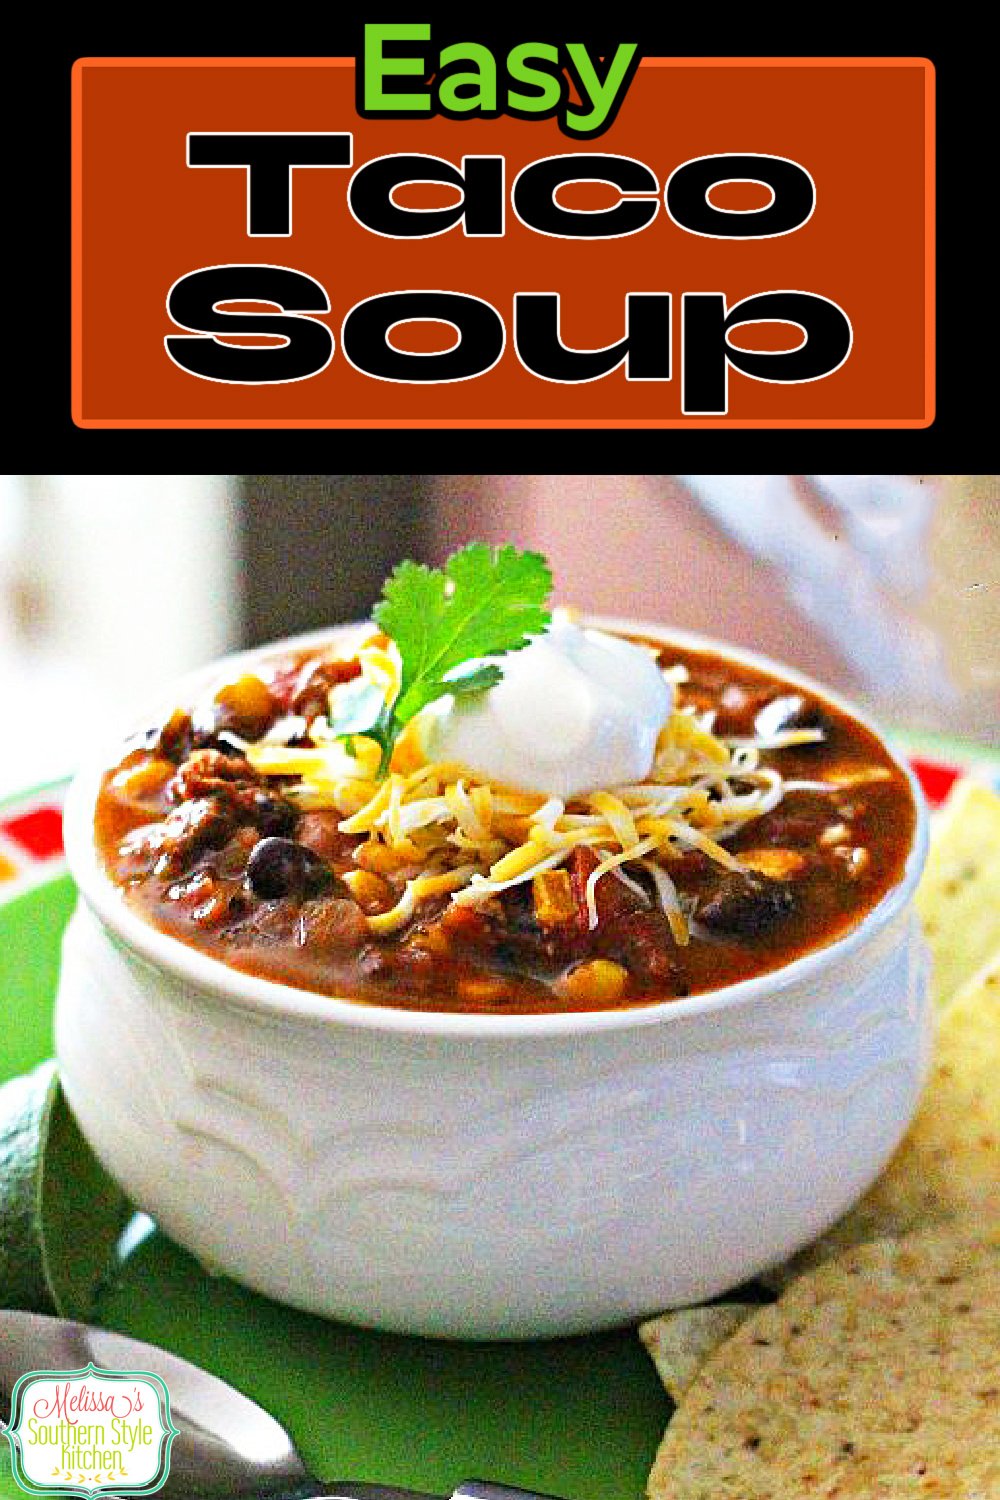 The family will love this stovetop Taco Soup for dinner any day of the week #tacosoup #tacos #souprecipes #easytacosouprecipe #dinner #dinnerideas #southernfood #southernrecipes #easygroundbeefrecipes #30minutemeals via @melissasssk